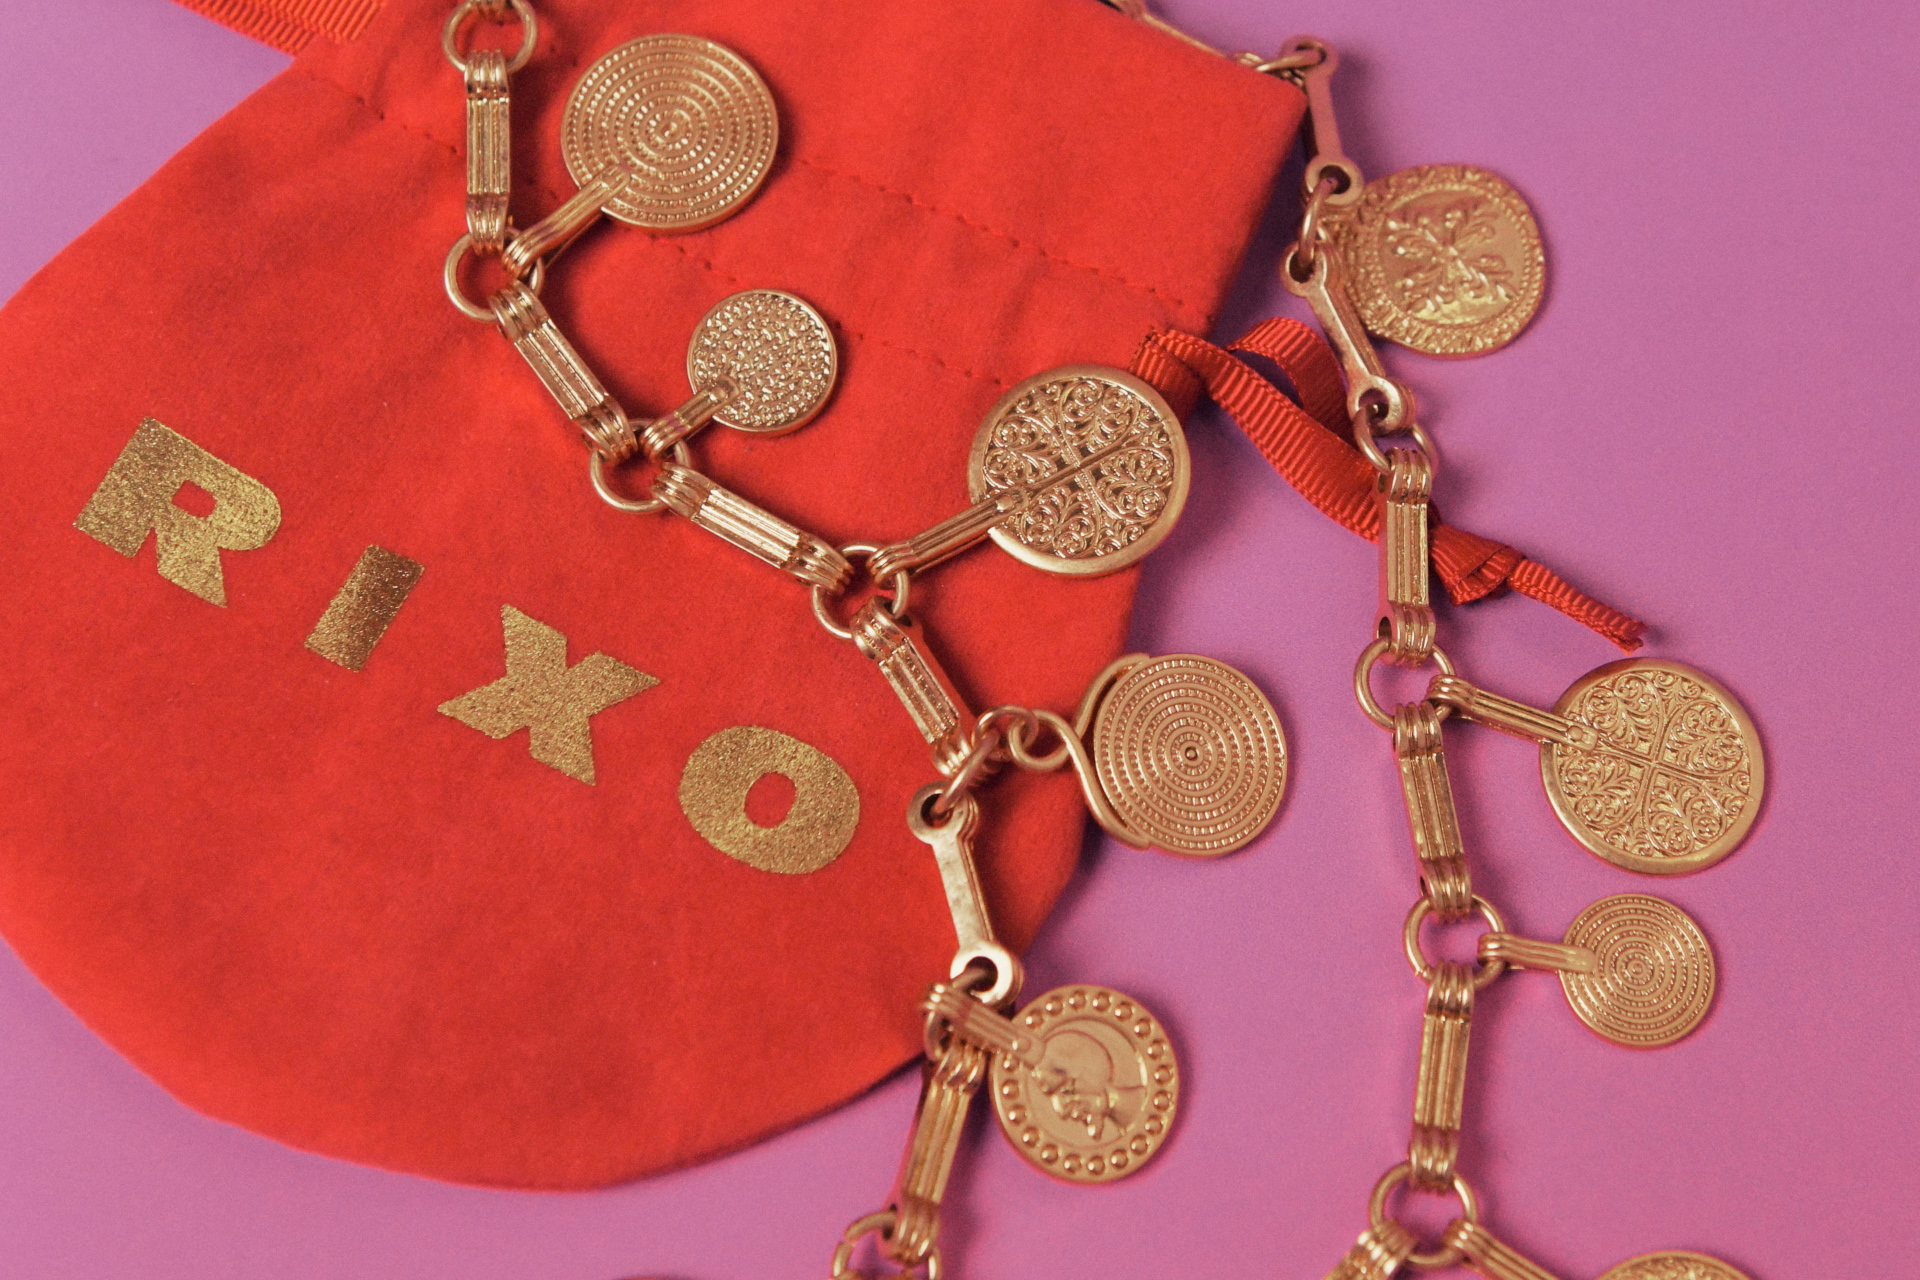 Red pouch with 'RIXO' spelt on the front in gold, with a gold necklace on top